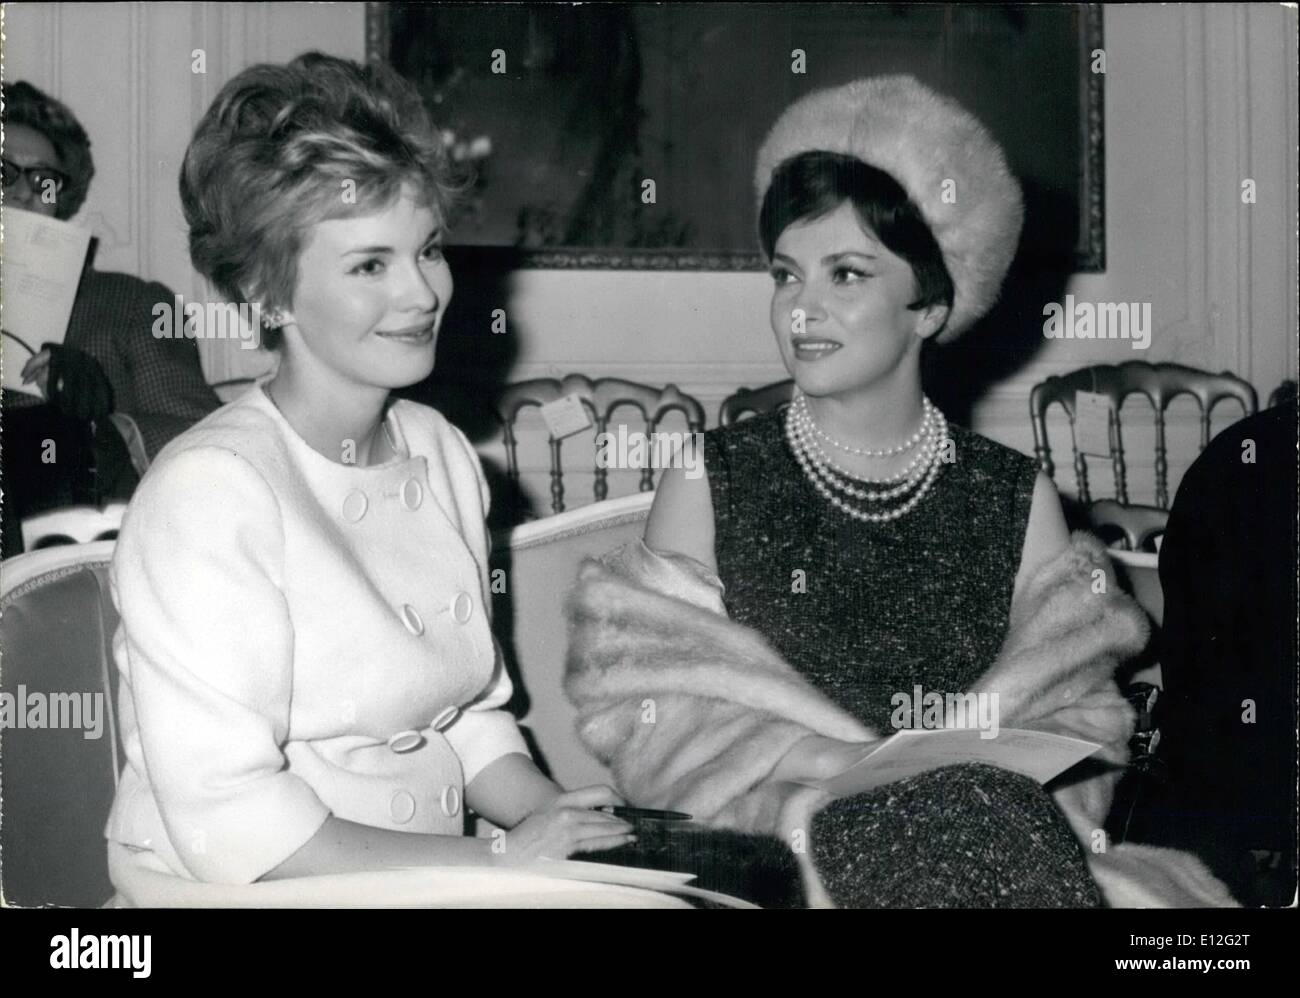 Dec. 26, 2011 - Gina Lollobrigida and Jean Seberg met in Christian Dior's show room to assist the presentation of Marc Bohan's spring and summer collection for 1963. Photo shows Jean Seberg and Gina Lollobrigida before the beginning or the presentation. Stock Photo